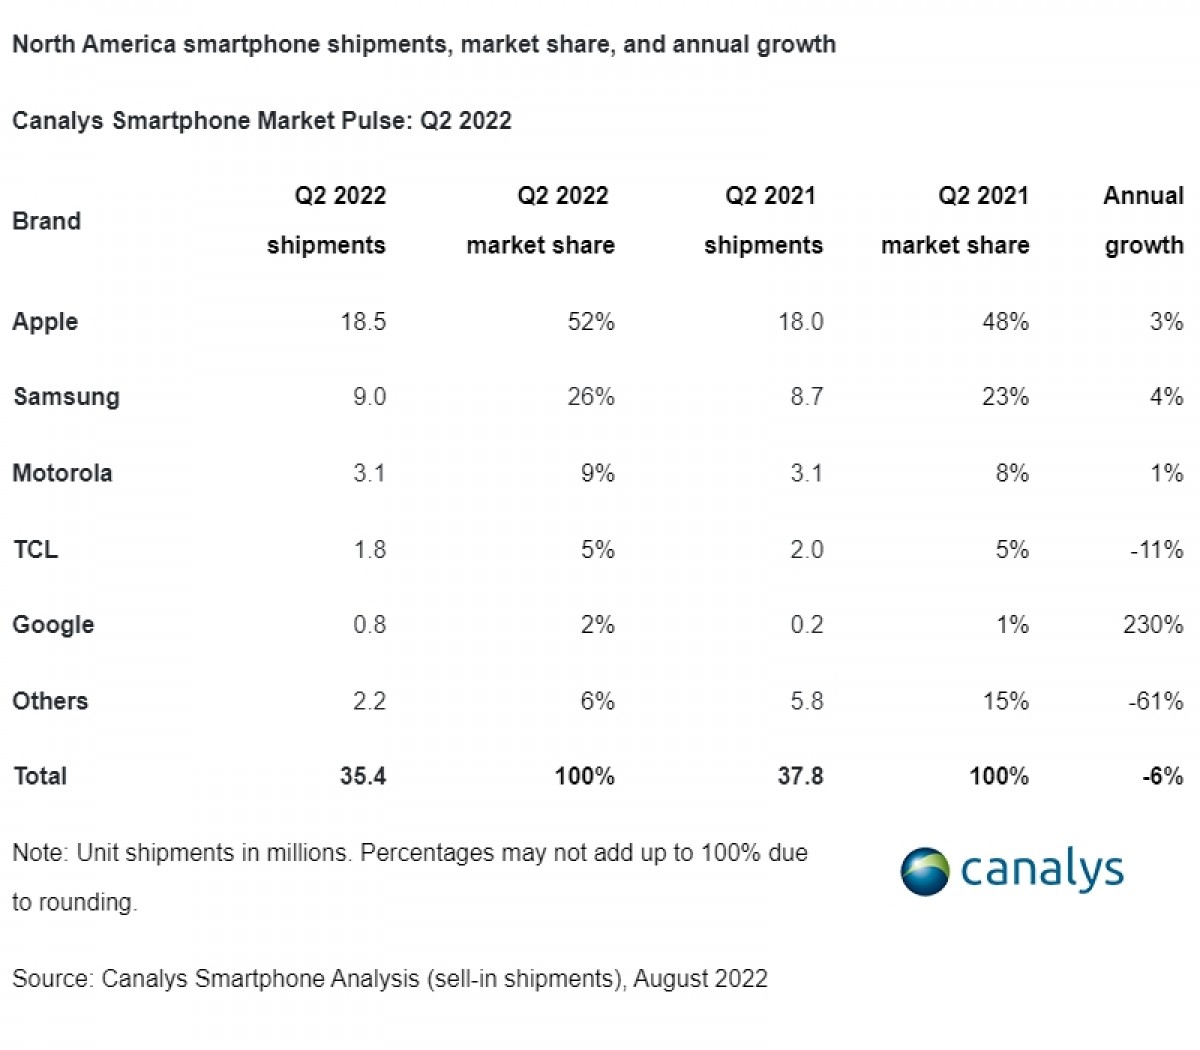 Canalys: Apple, Samsung shipped more phones in N. America despite declining market